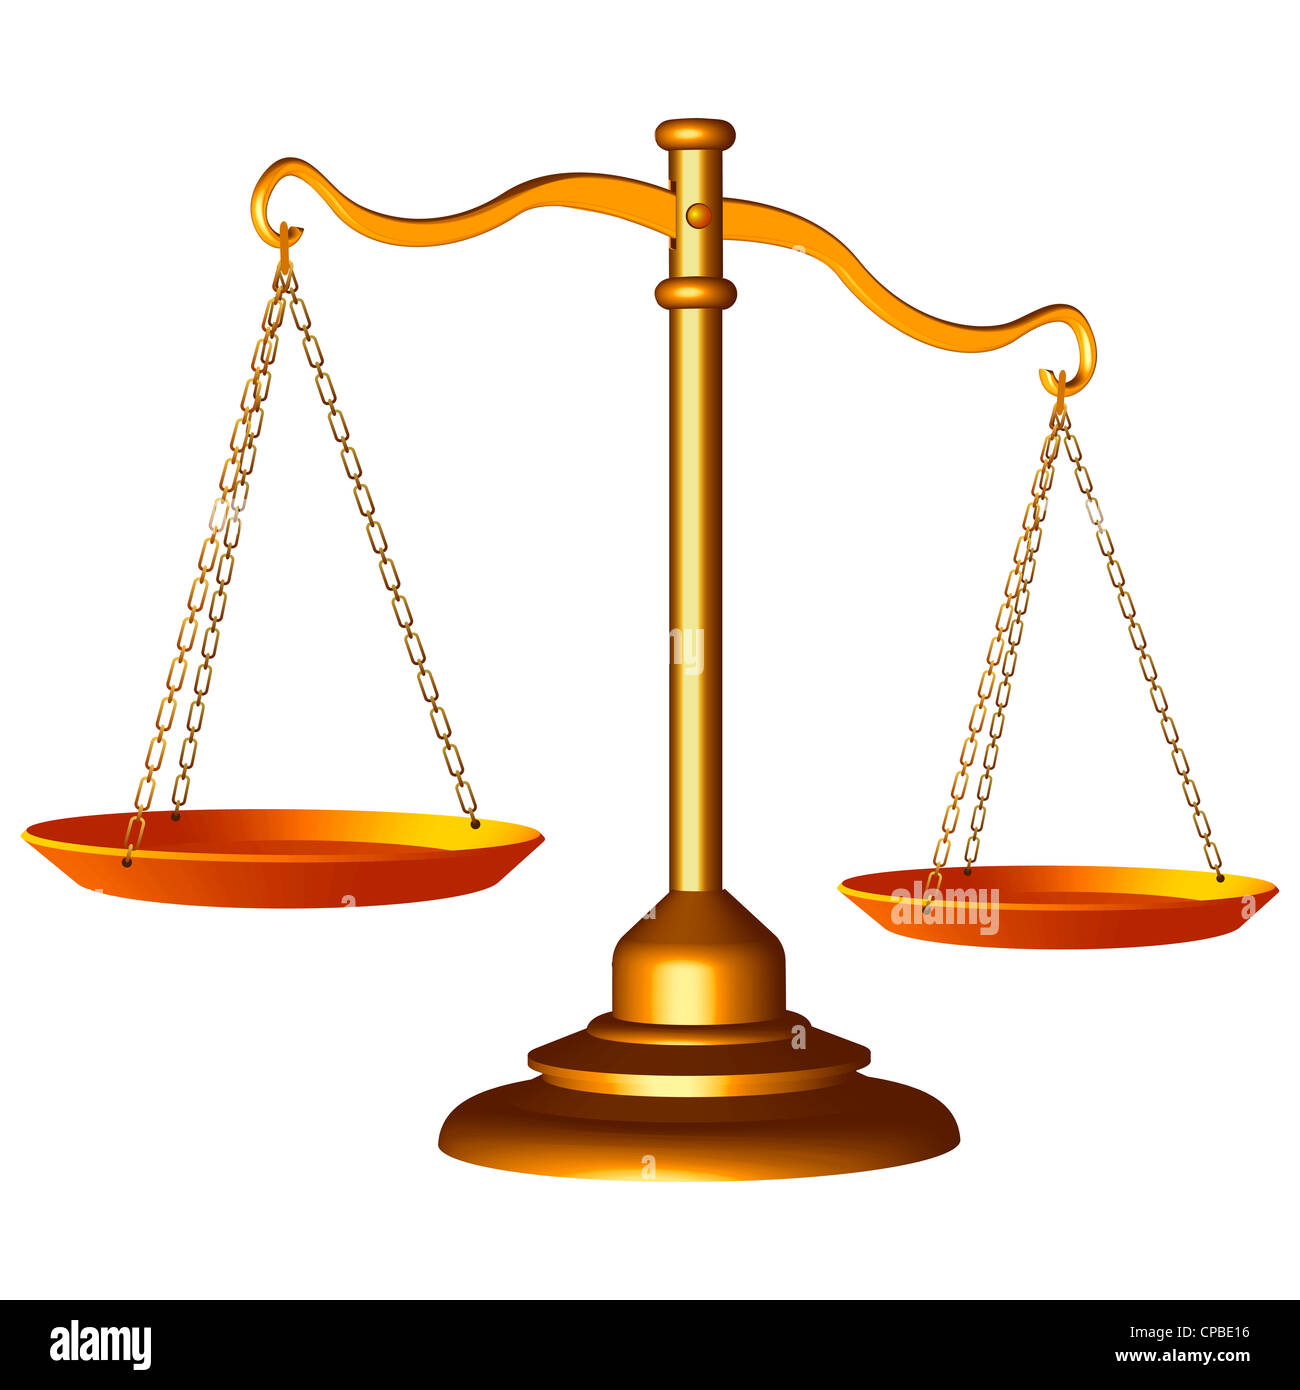 golden scale of justice against white background, abstract vector art illustration Stock Photo